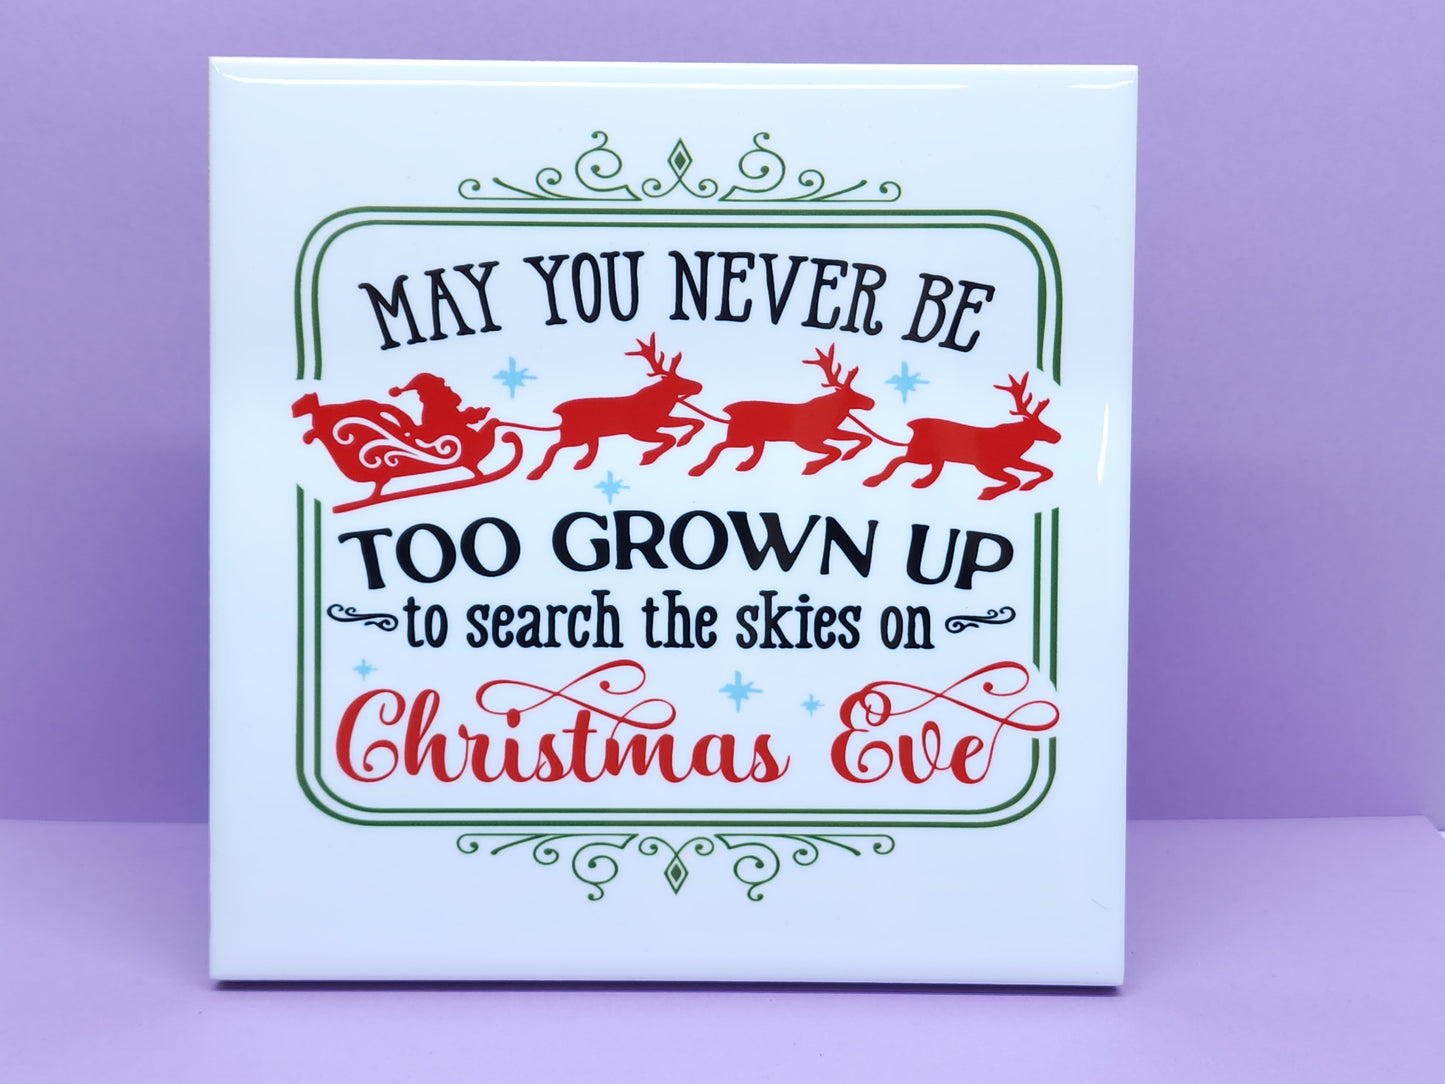 "May you Never be too Grown up to Search the Skies on Christmas Eve" 6x6 Decorative Ceramic Tile